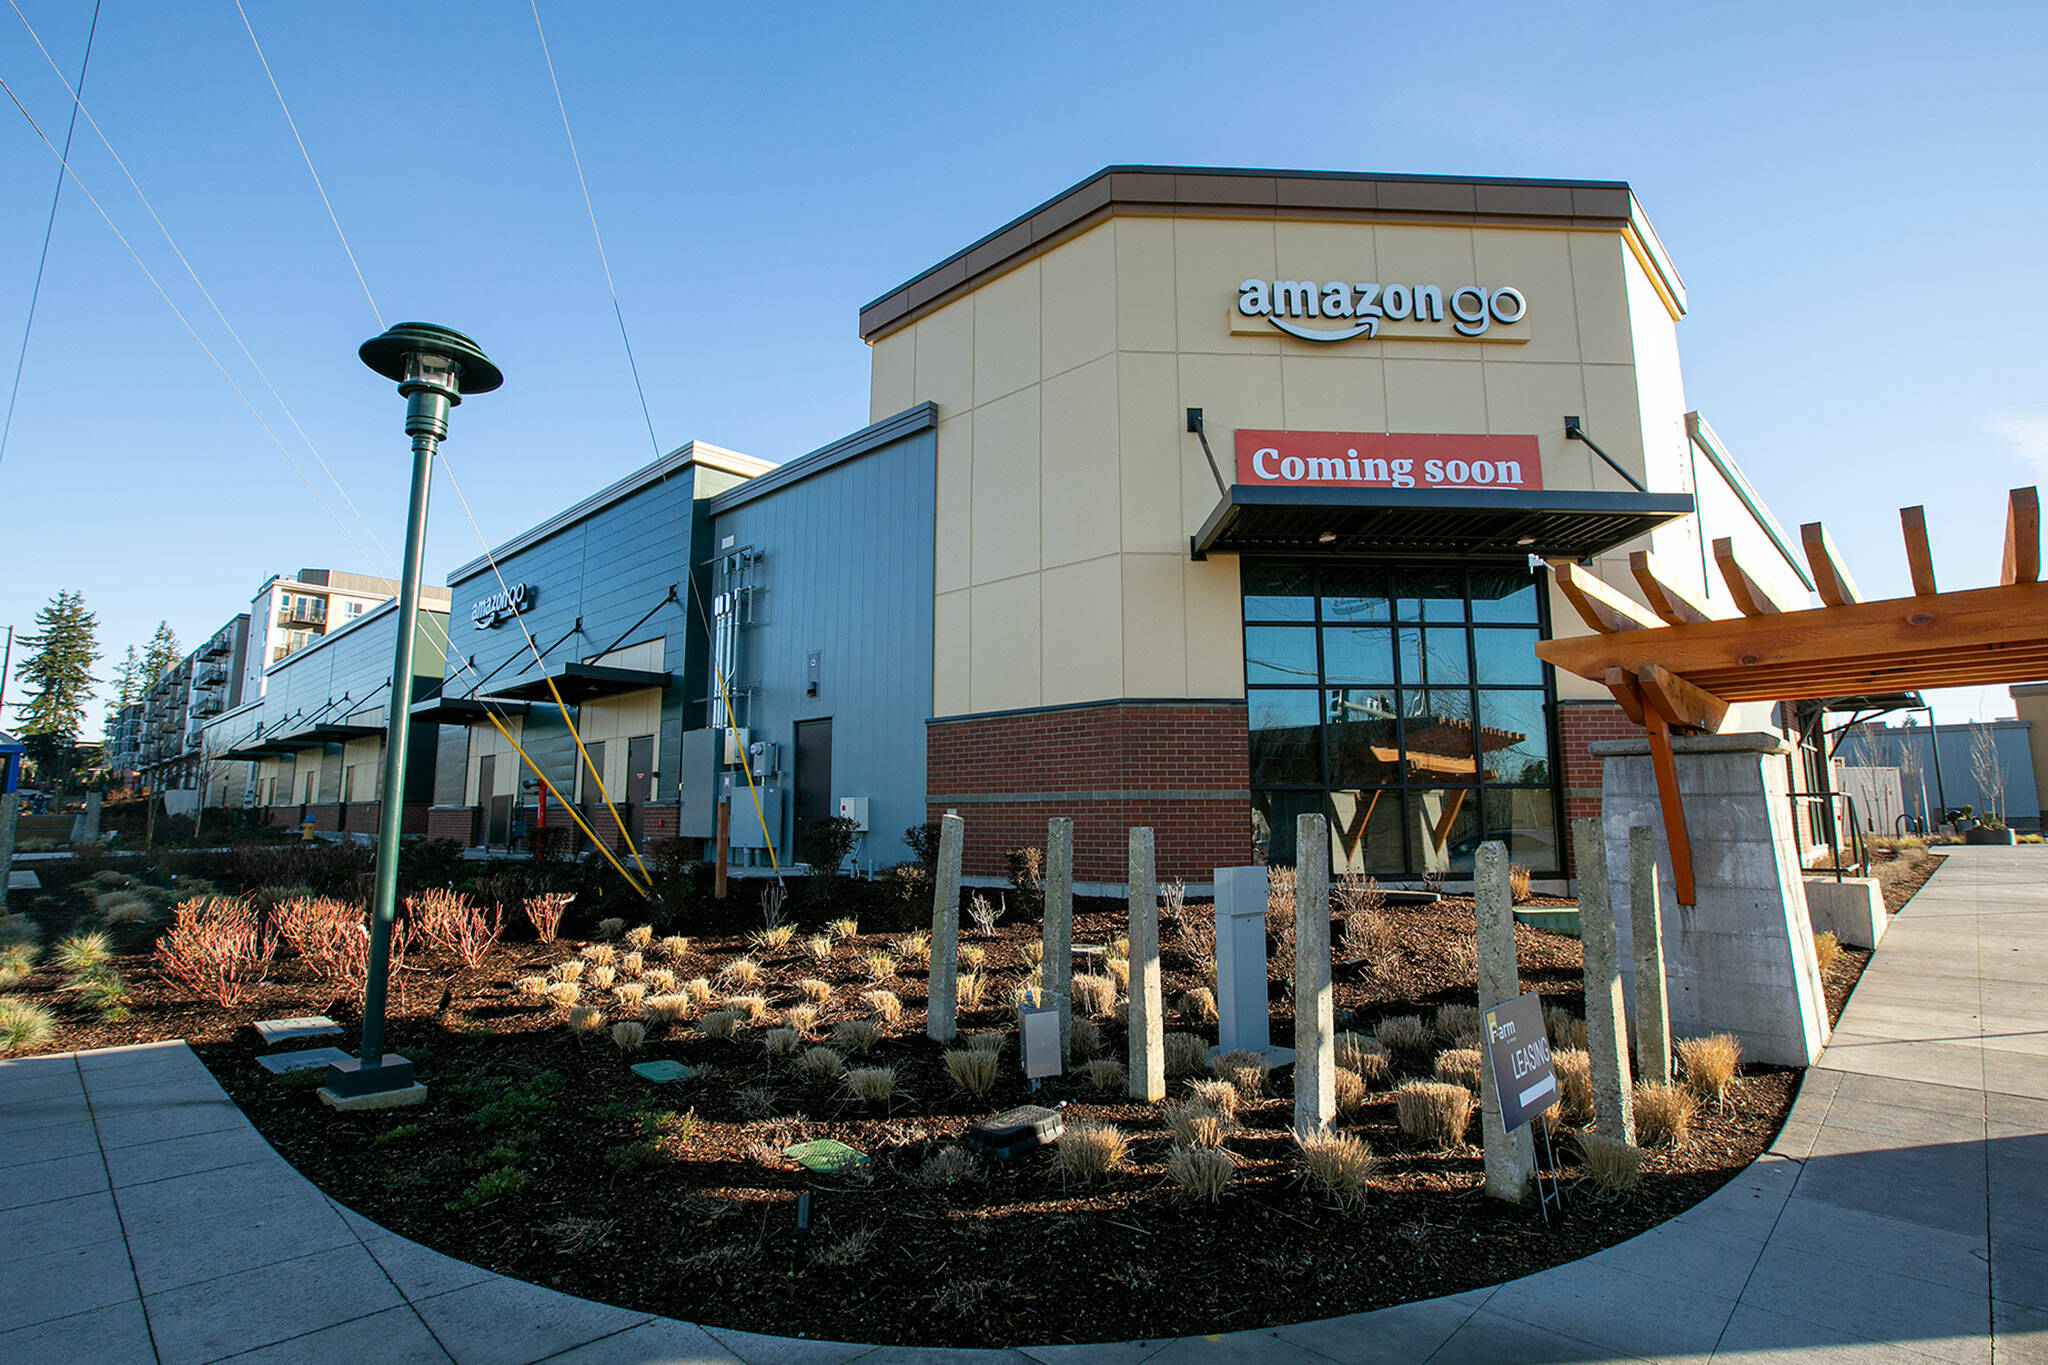 Convenient or creepy? Cashier-less Amazon Go coming to Mill Creek |  HeraldNet.com